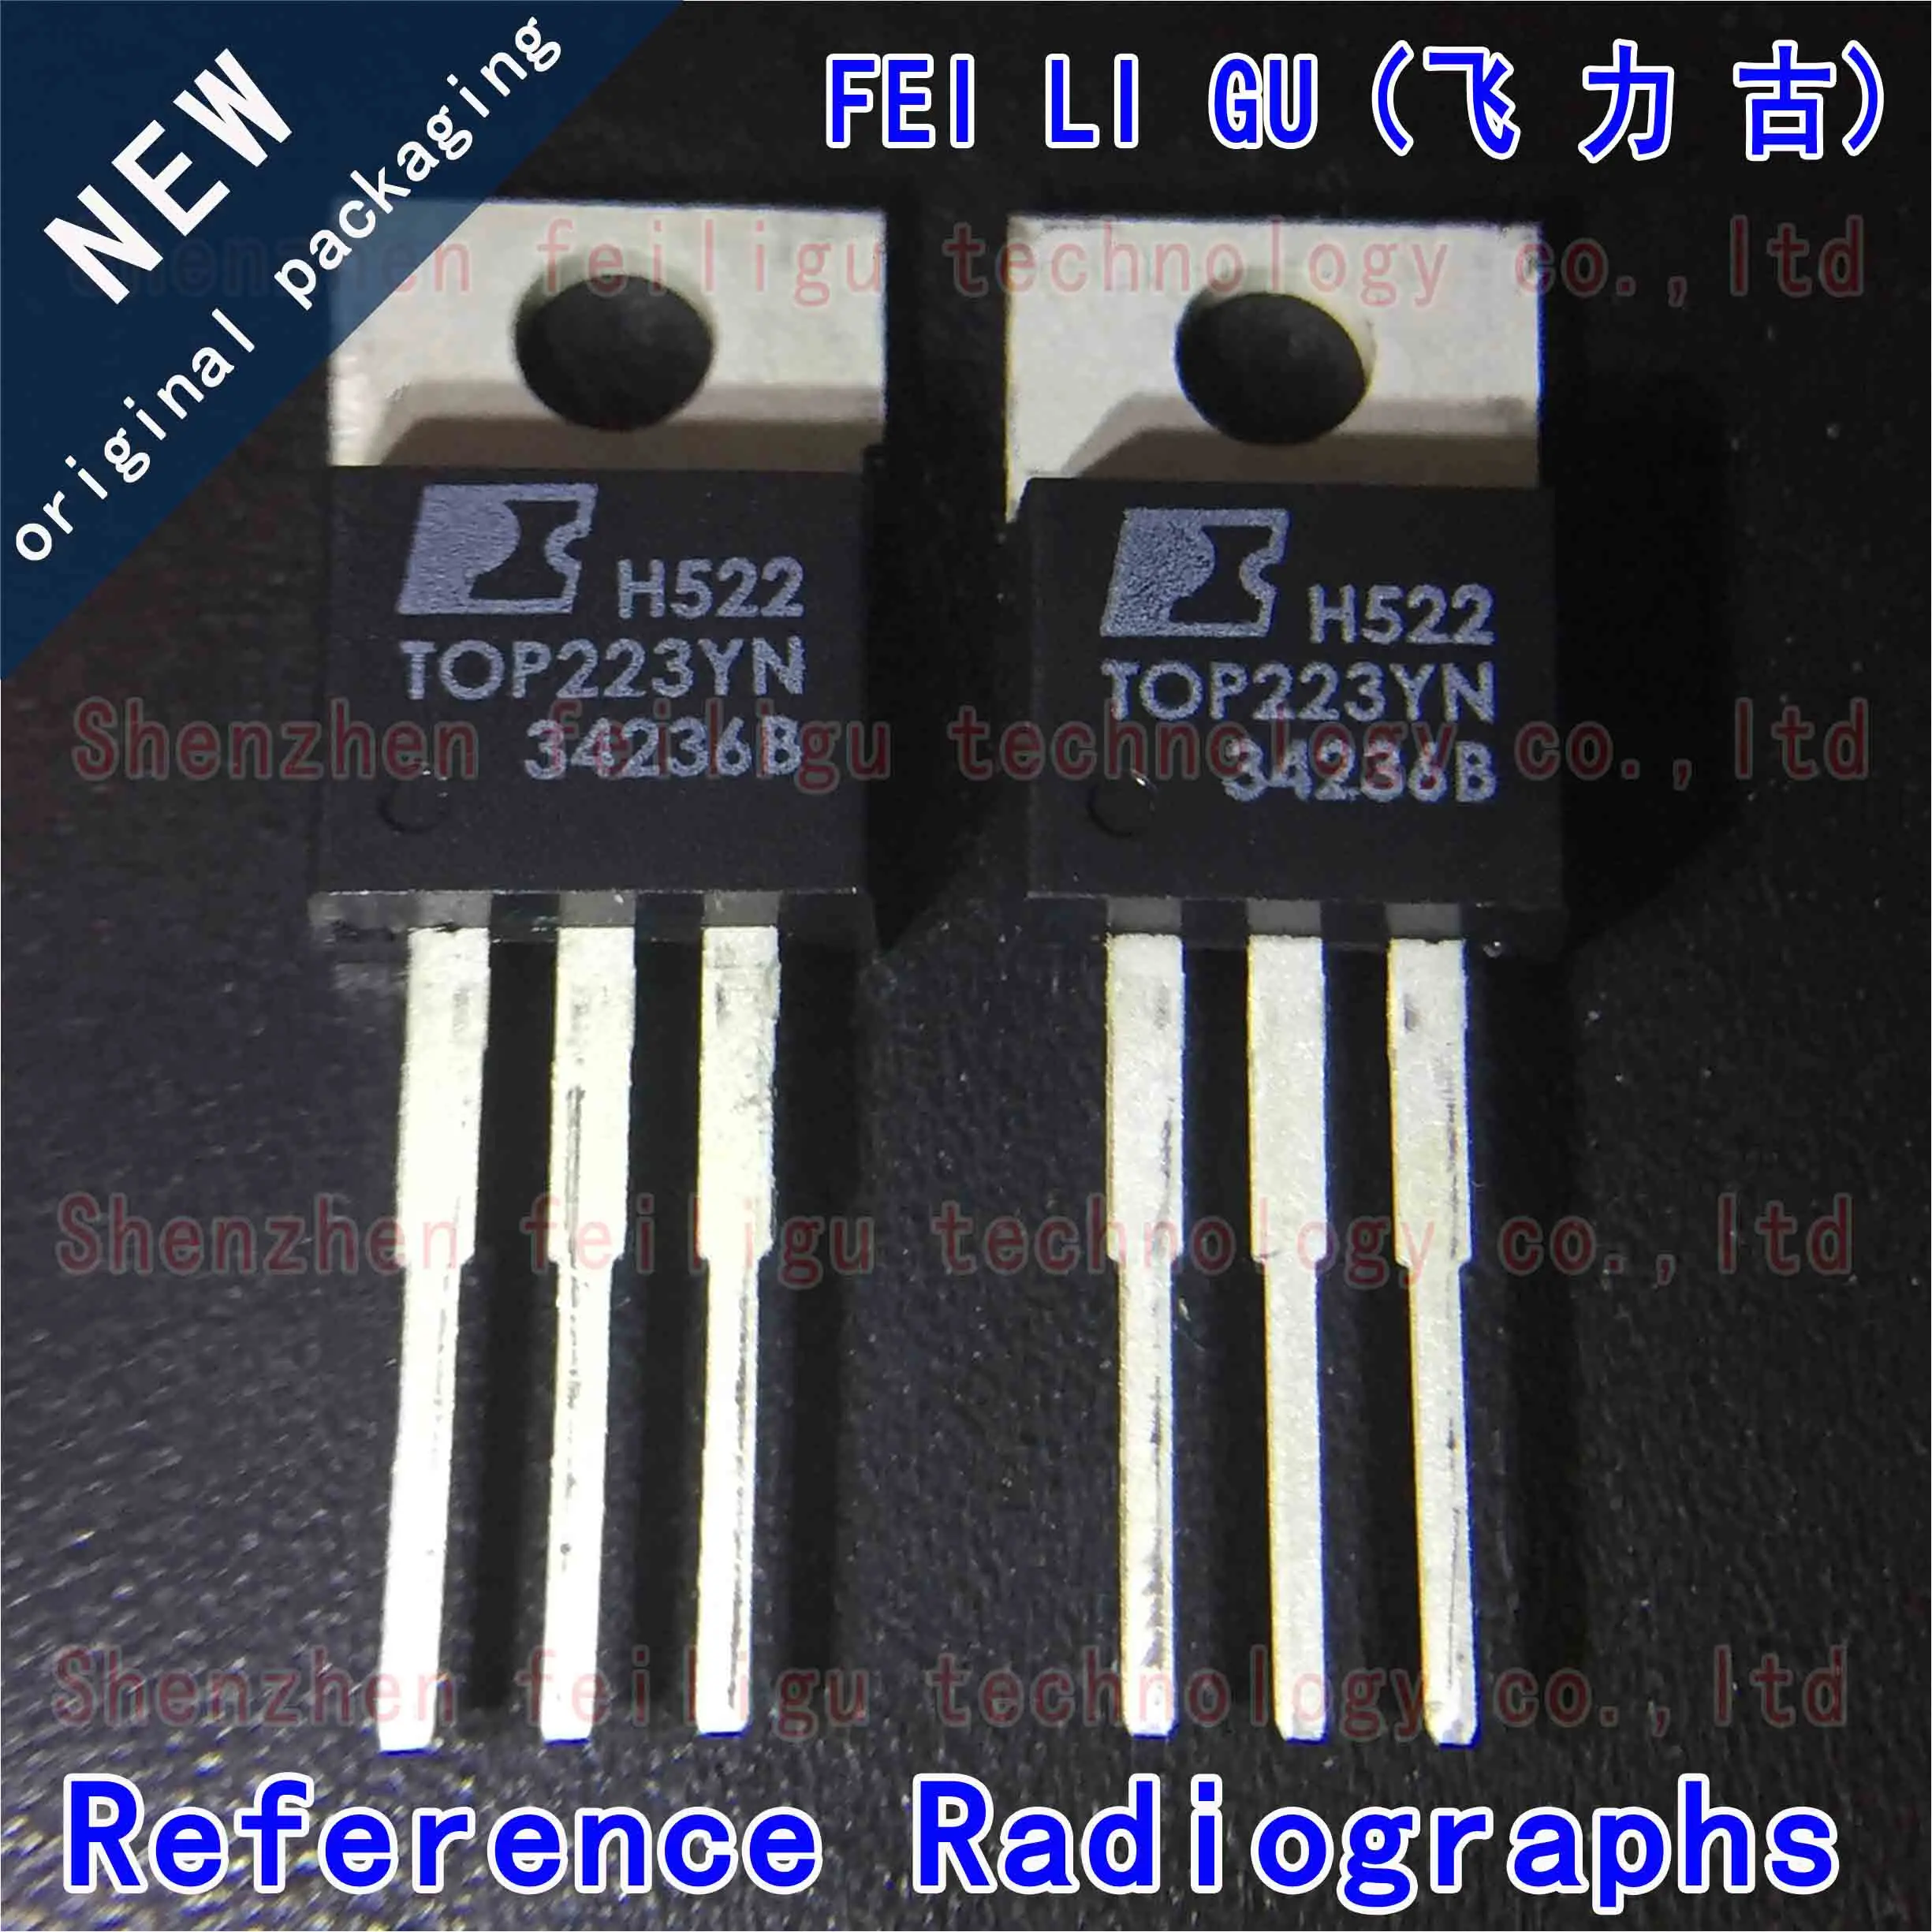 1~30PCS 100% New original TOP223YN TOP223 package:TO-220 plug AC-DC controller voltage regulator power management chip new original controller and regulator uc2842adwtr soic 16